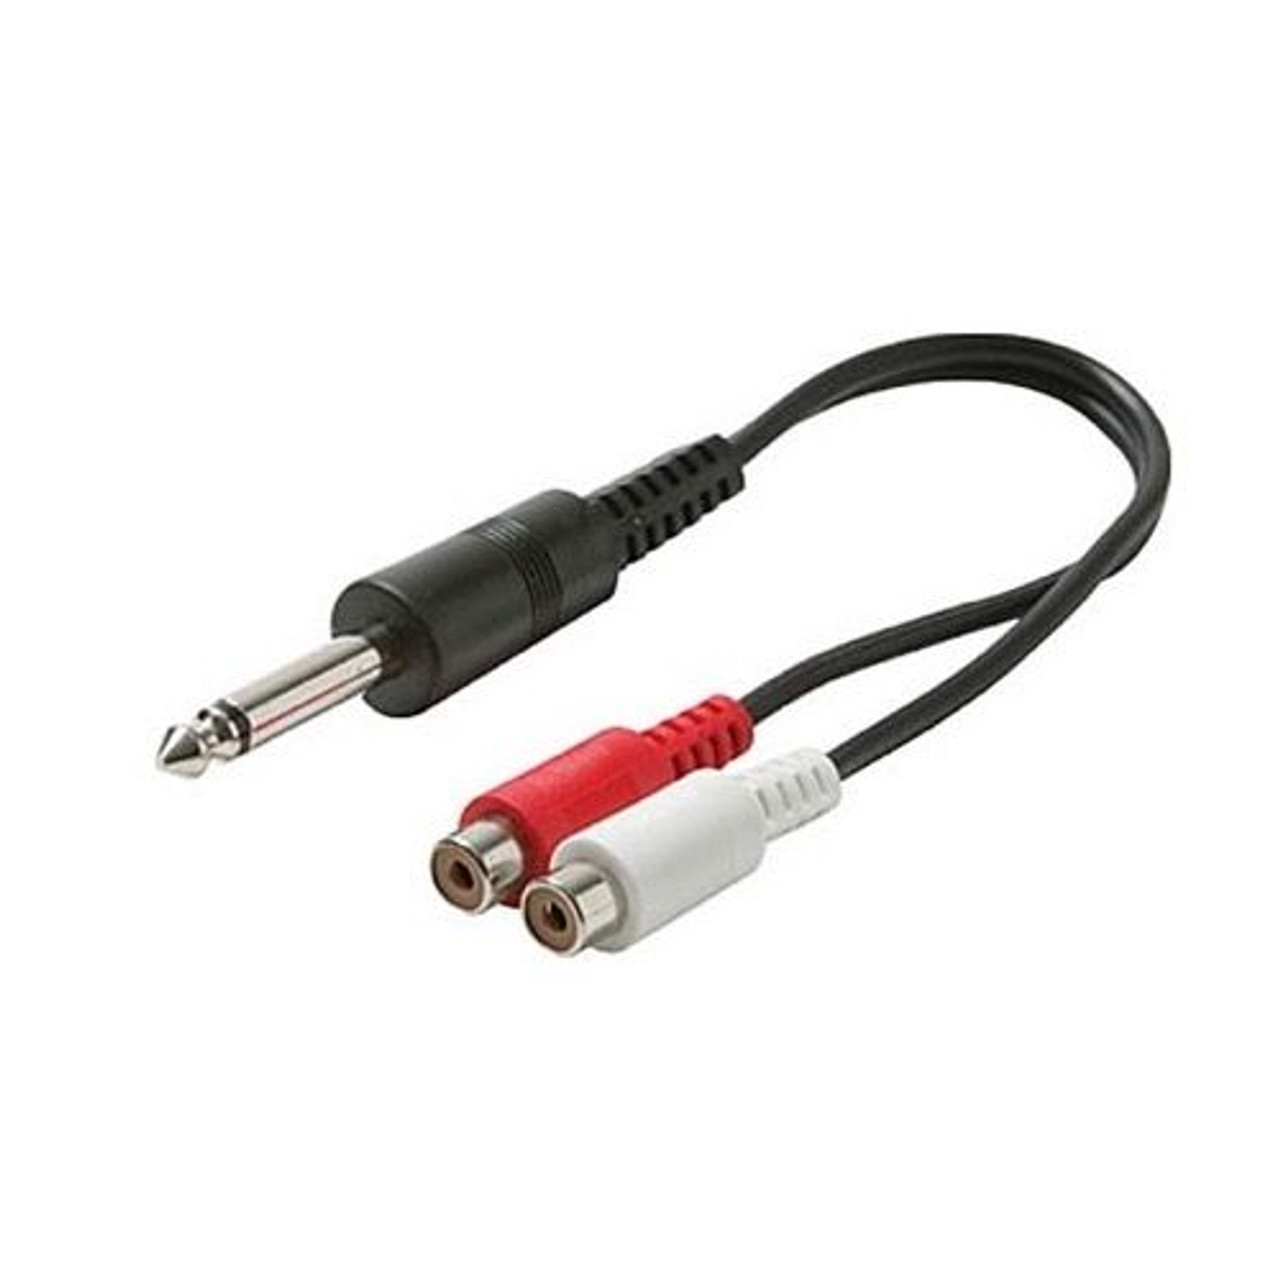 Eagle 6" Inch 1/4" Mono Male 2 RCA Female Adapter Cable 6.3mm Jacks Phono Mono to Dual RCA Female Adapter Plug Shielded Audio Splitter Cable Signal Separating Push-In Component Jack Connector